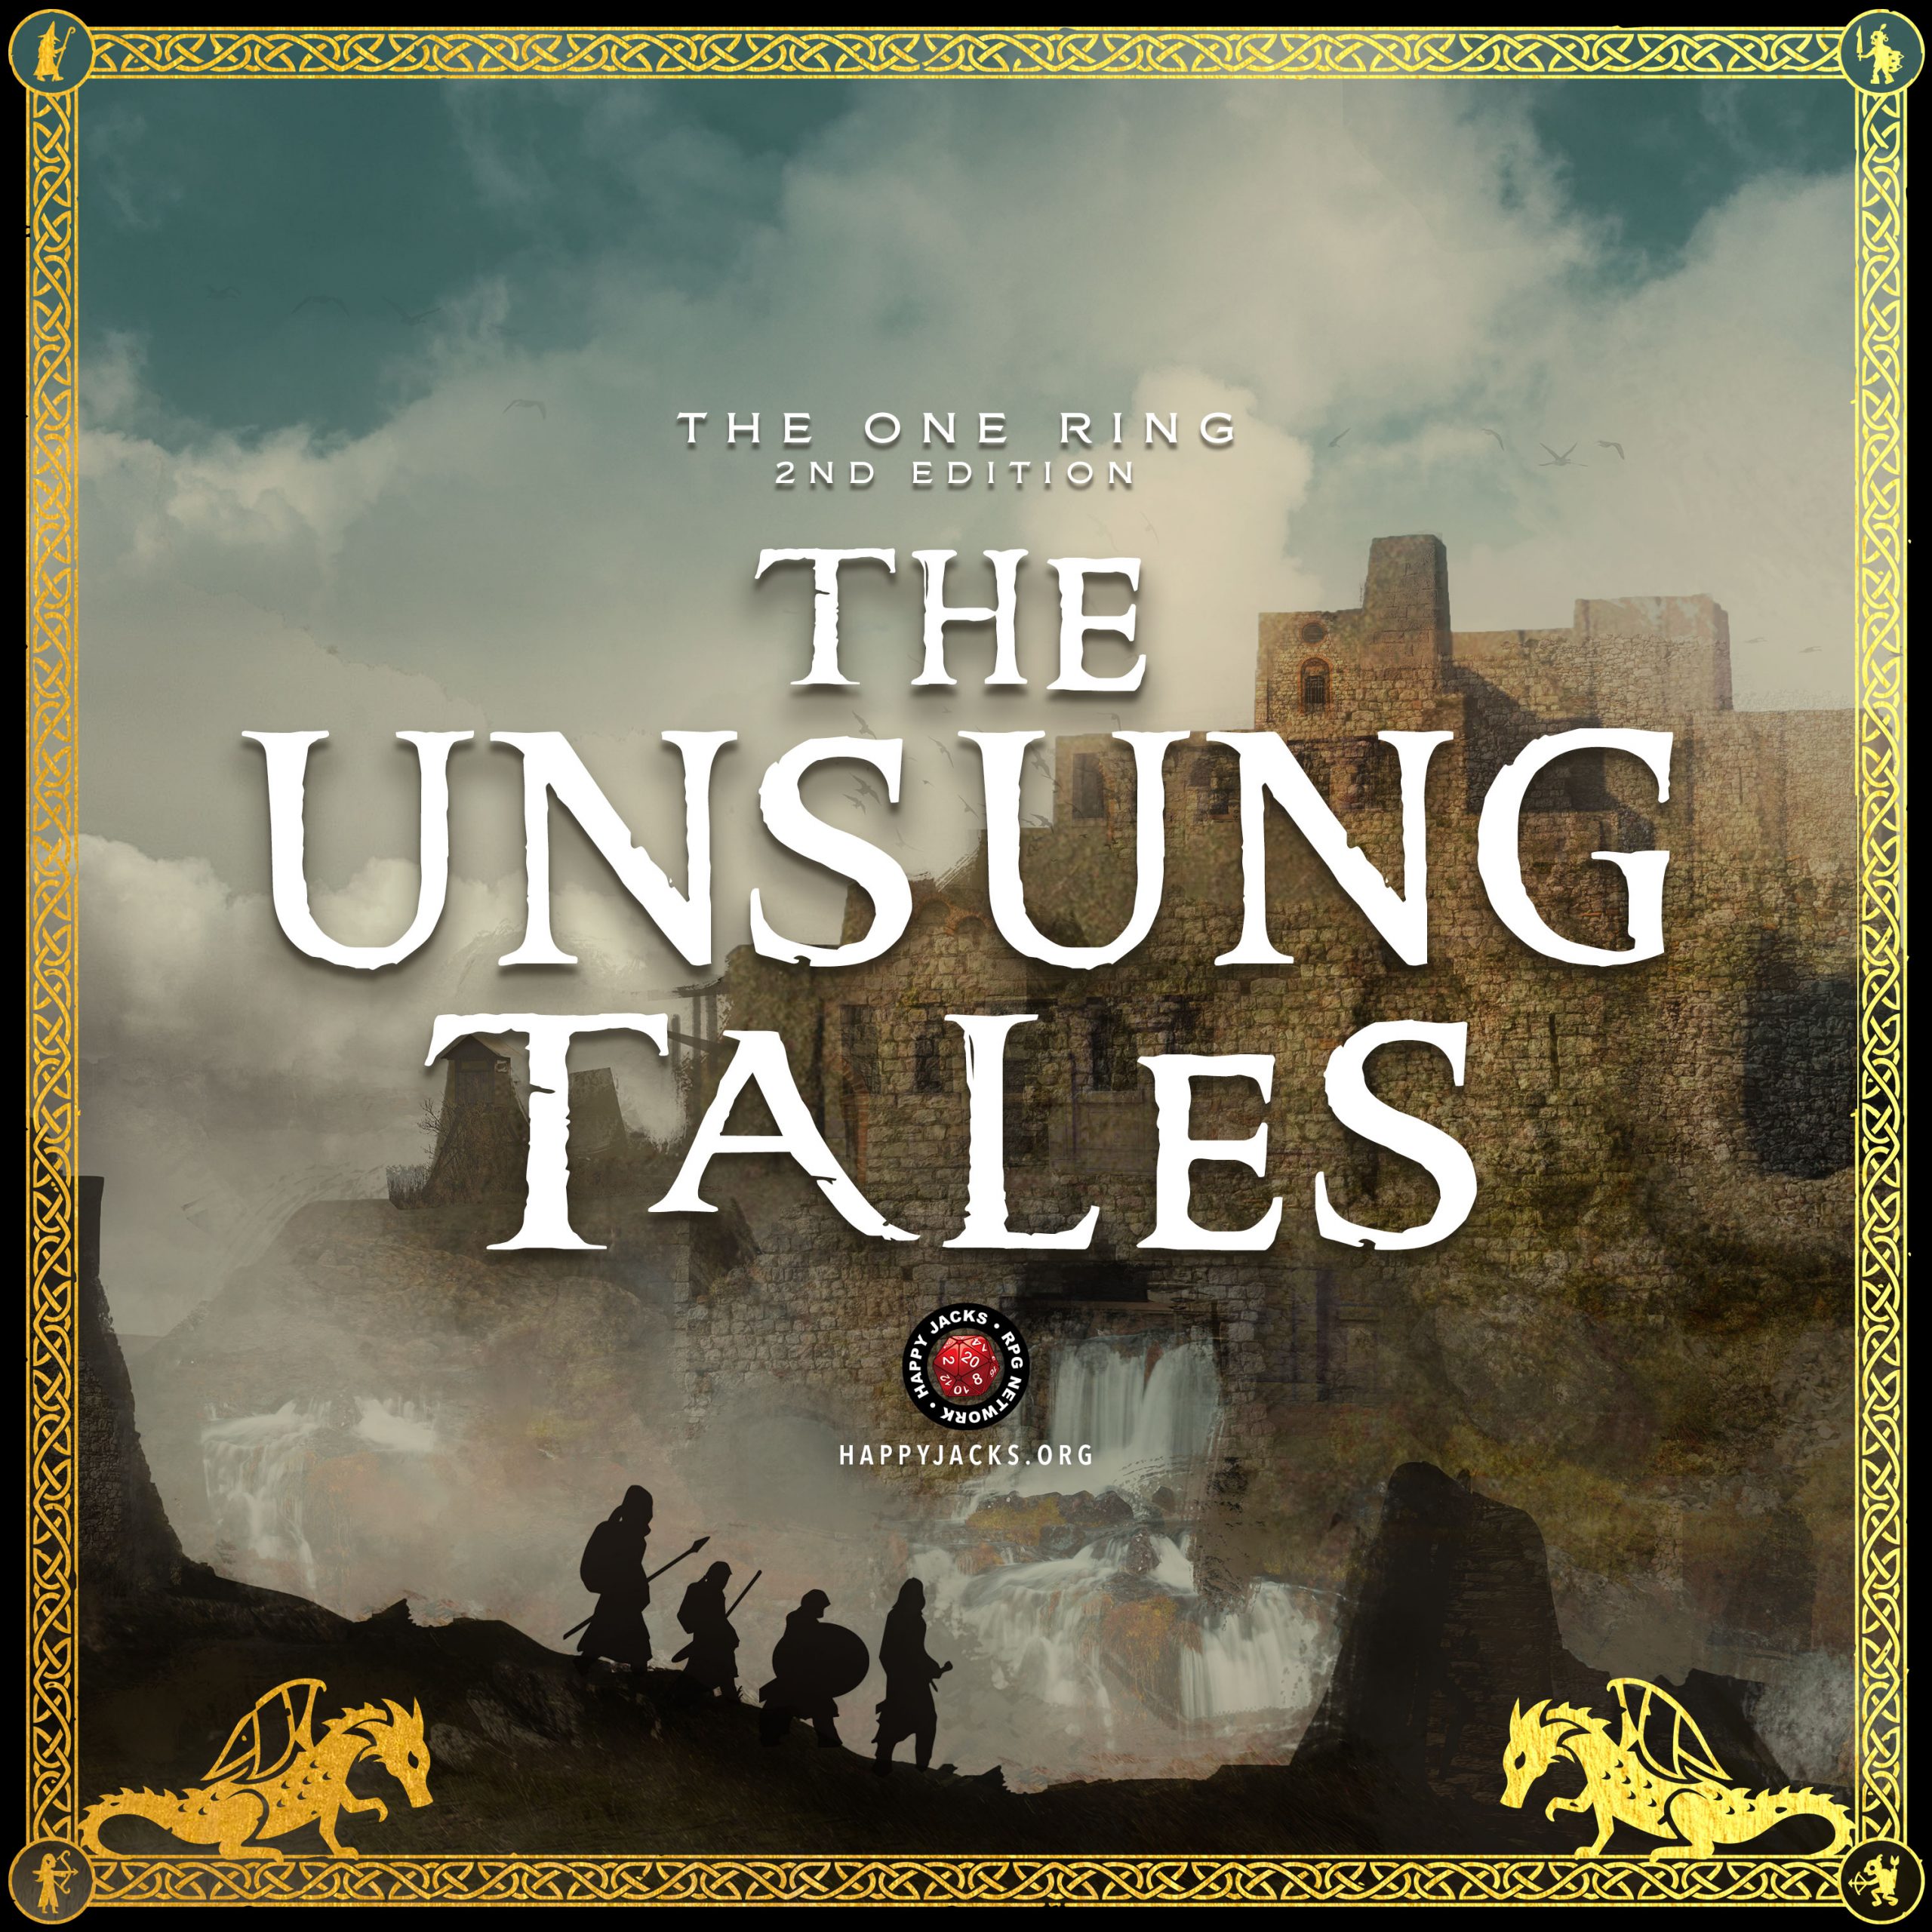 UNSUNG06 Nenuial’s Doom | The Unsung Tales | The One Ring 2e